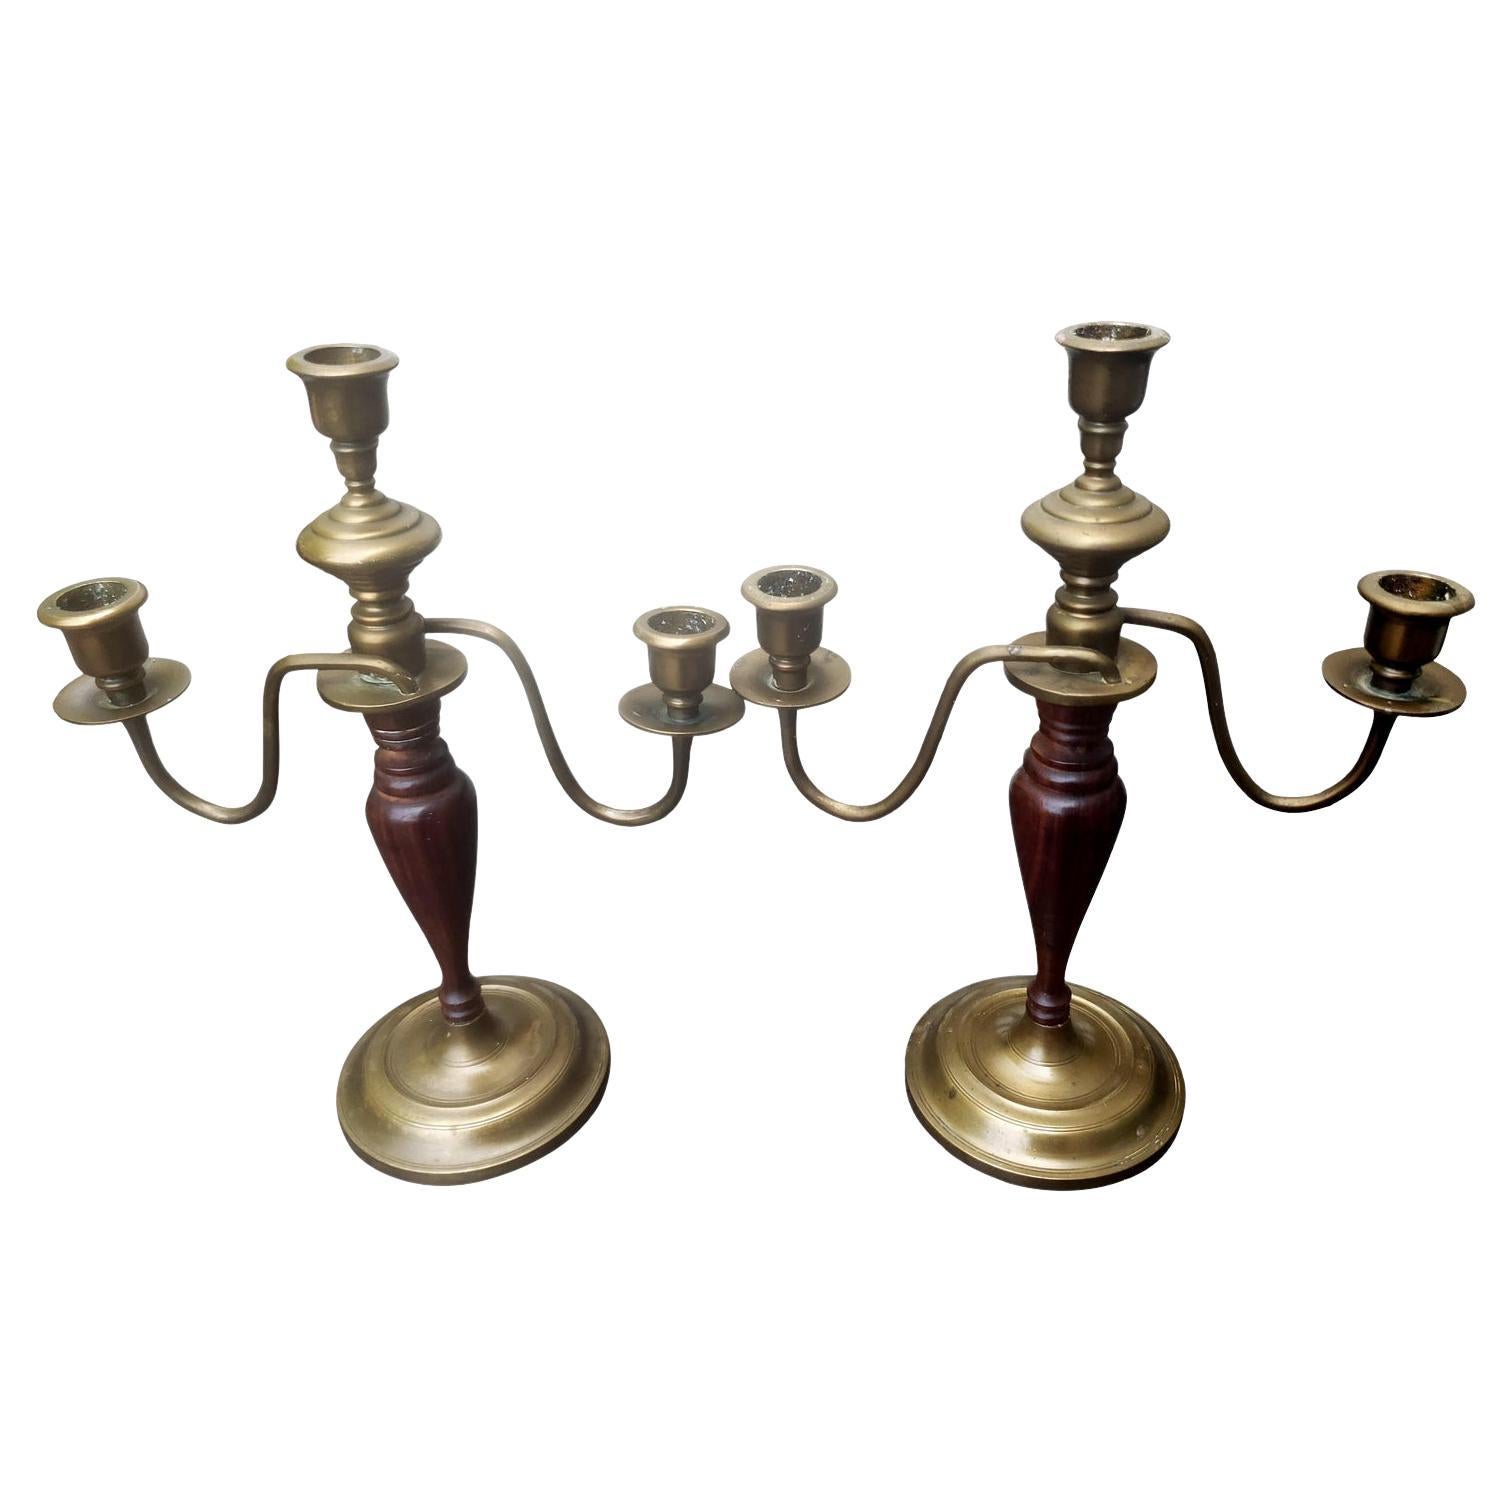 19th Century Mahogany and Brass Candelabras, a Pair For Sale